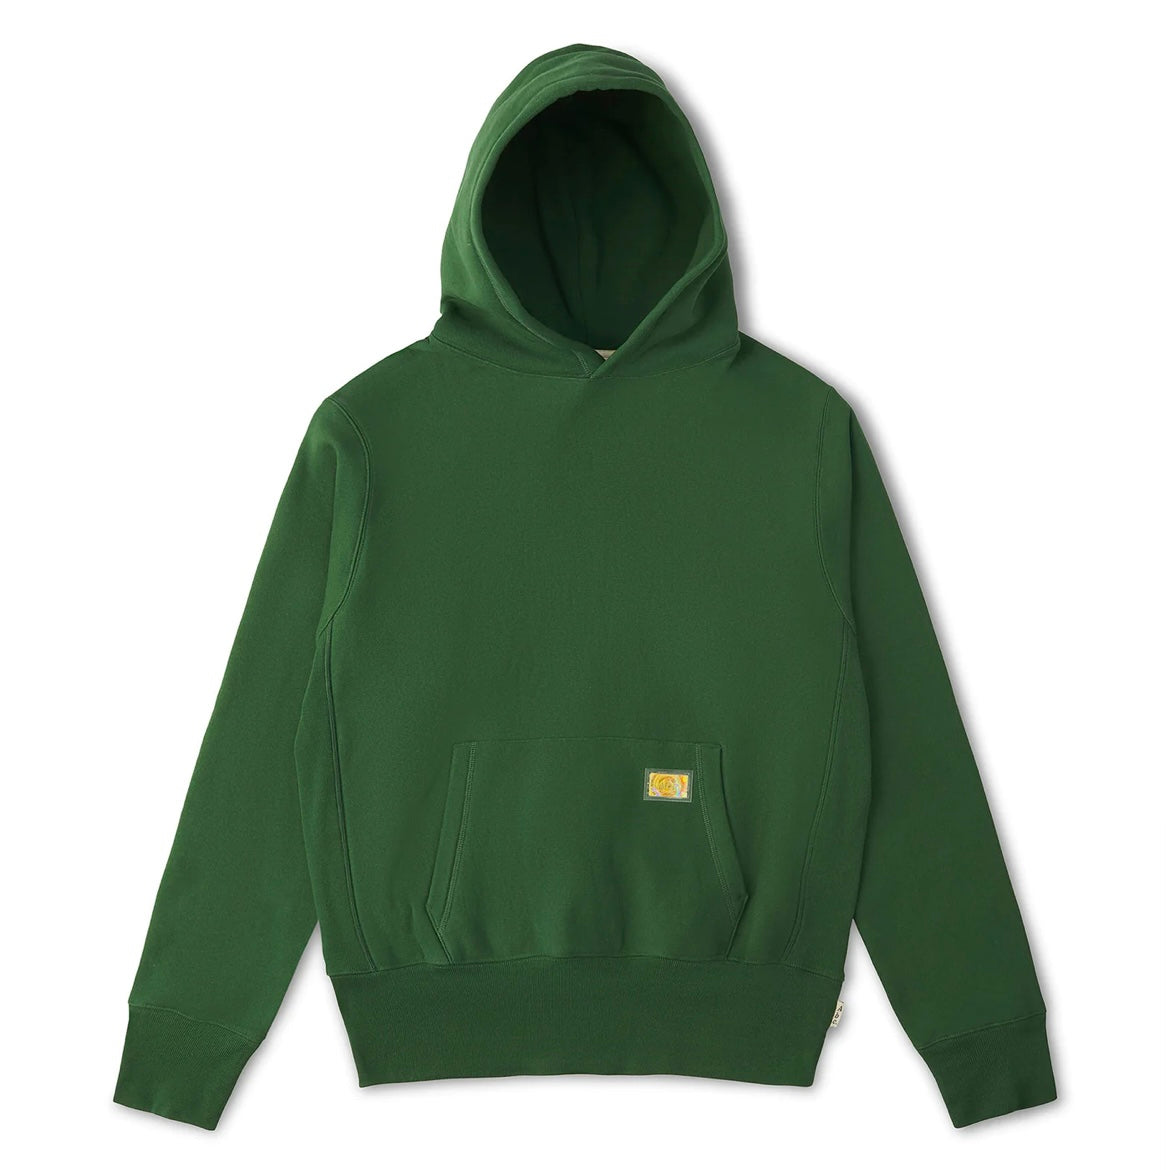 ABC 123 Pullover Hoodie